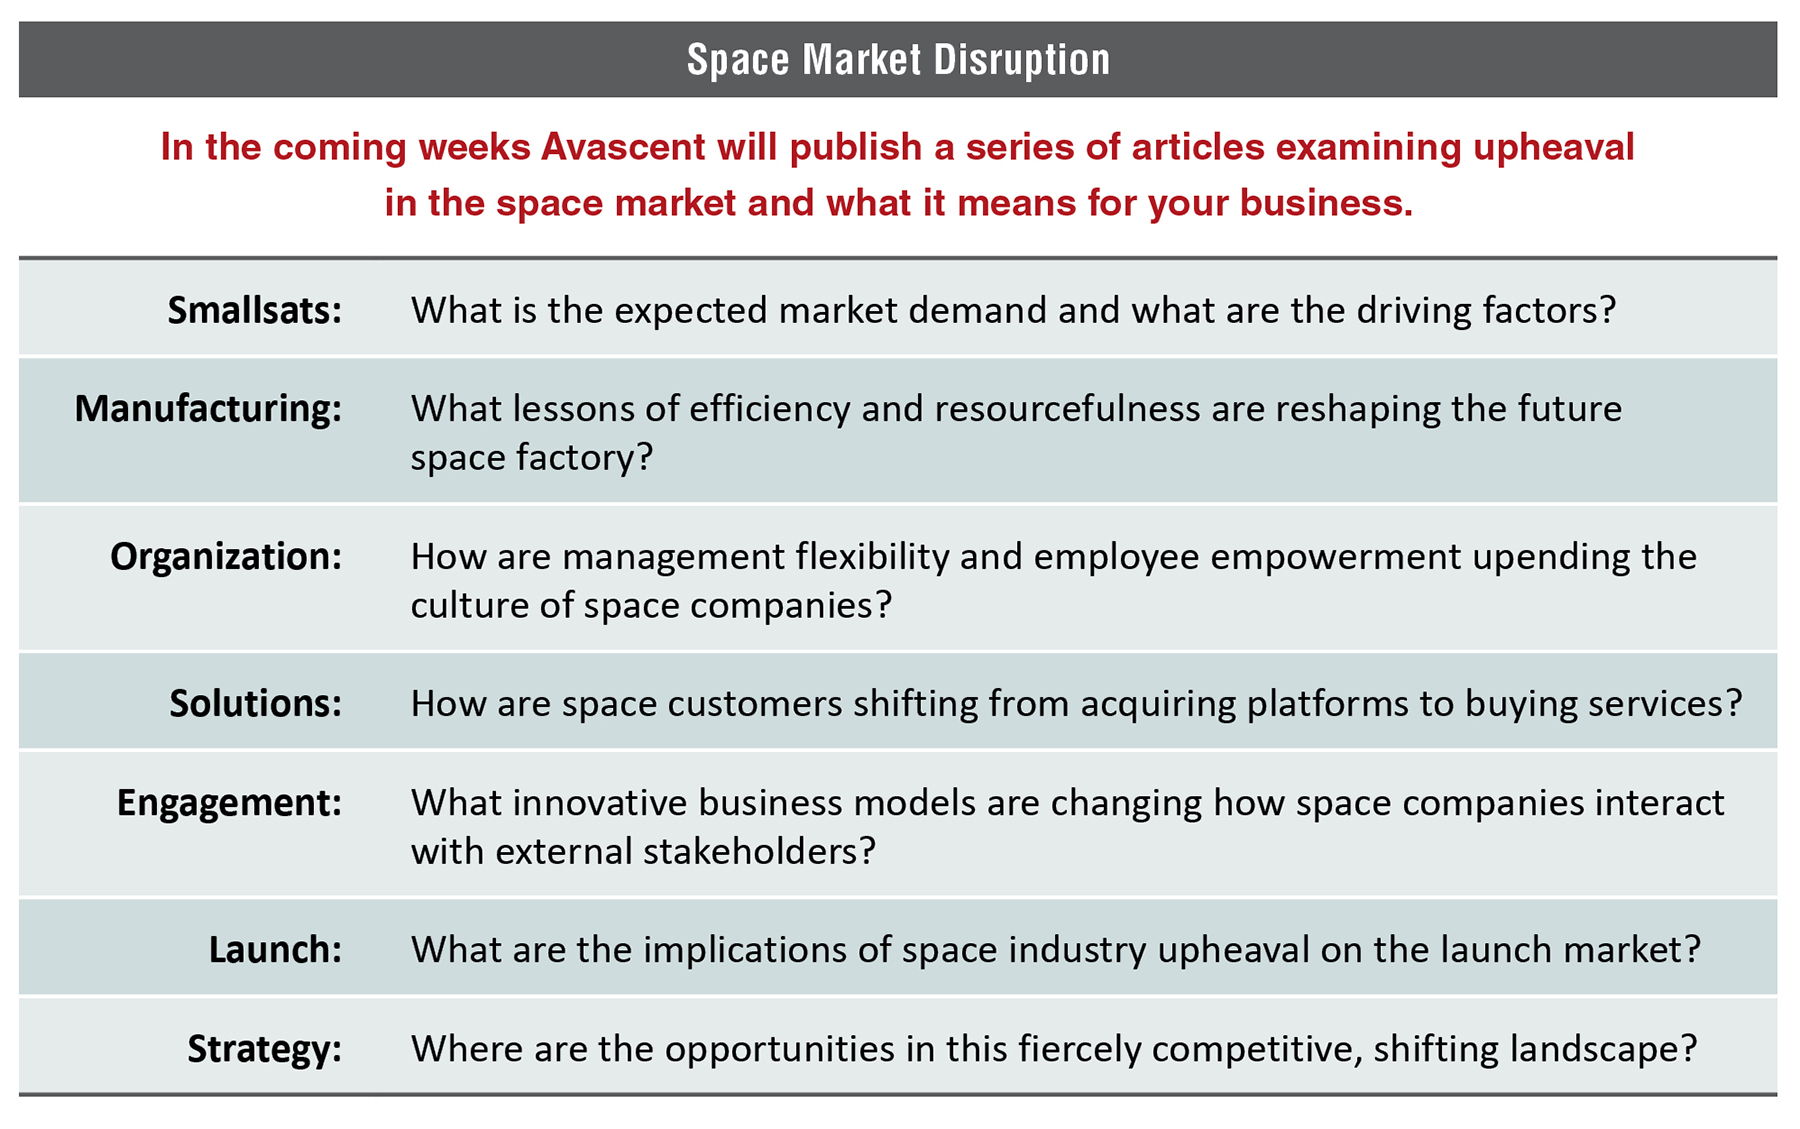 Space Market Disruption Table 1